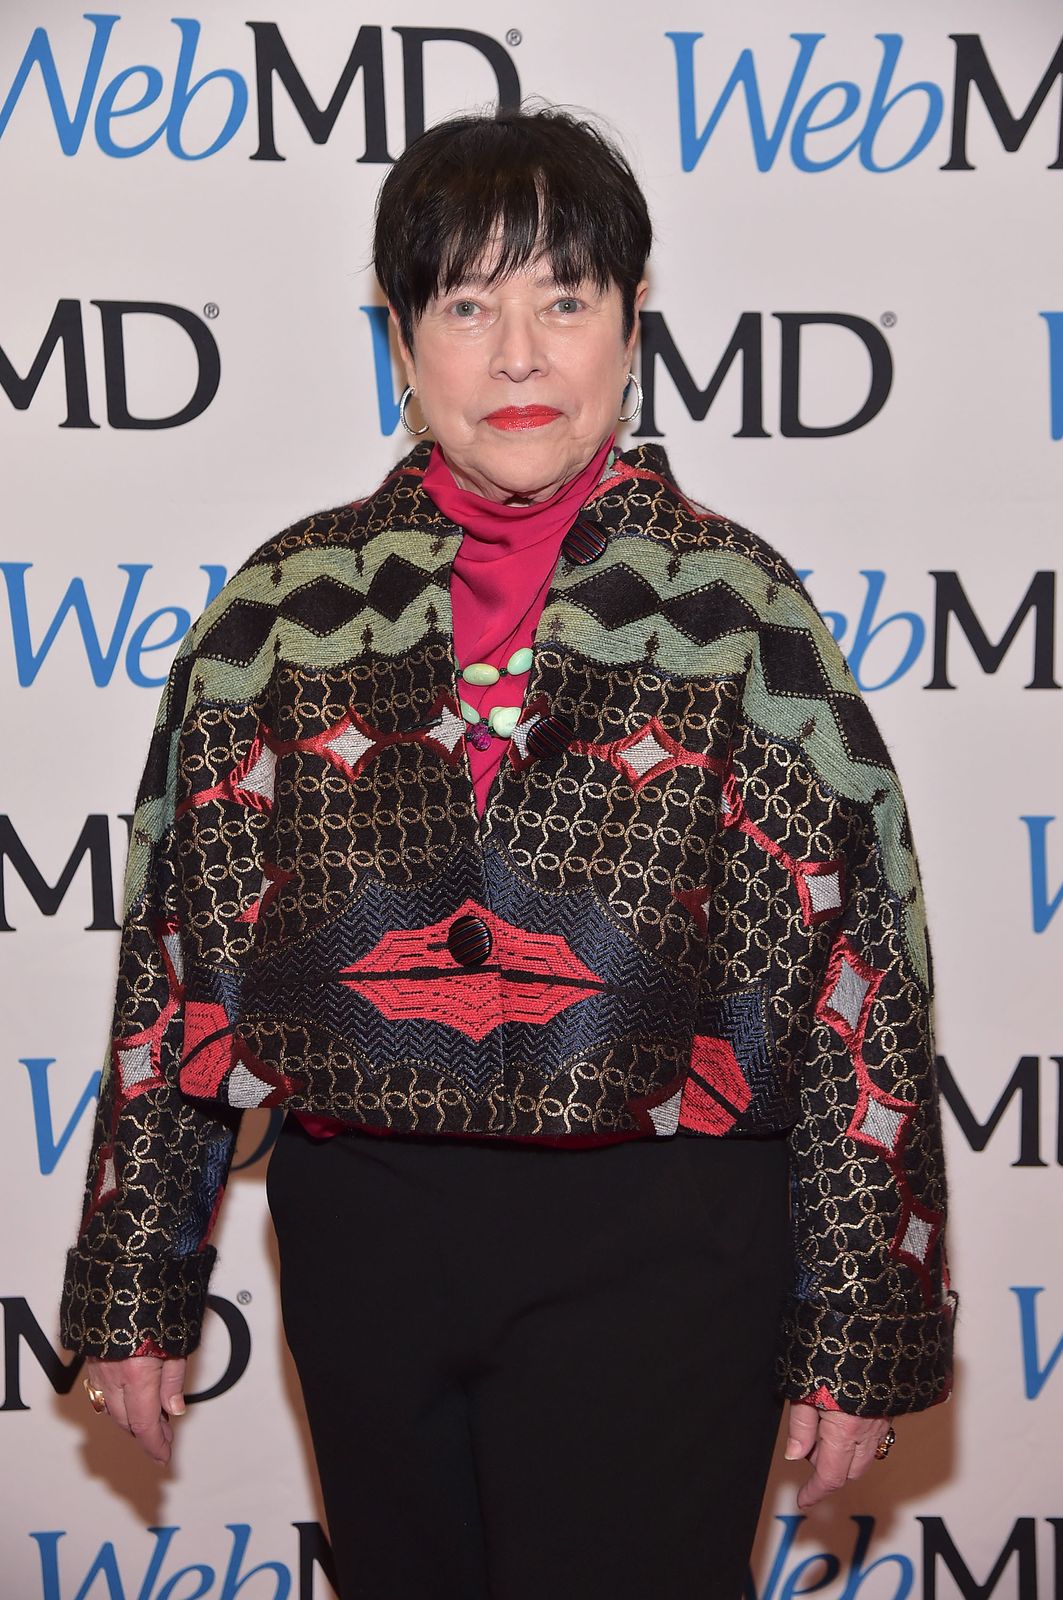 Kathy Bates at the WebMD Health Hero Awards on January 15, 2019, in New York City. | Source: Theo Wargo/Getty Images